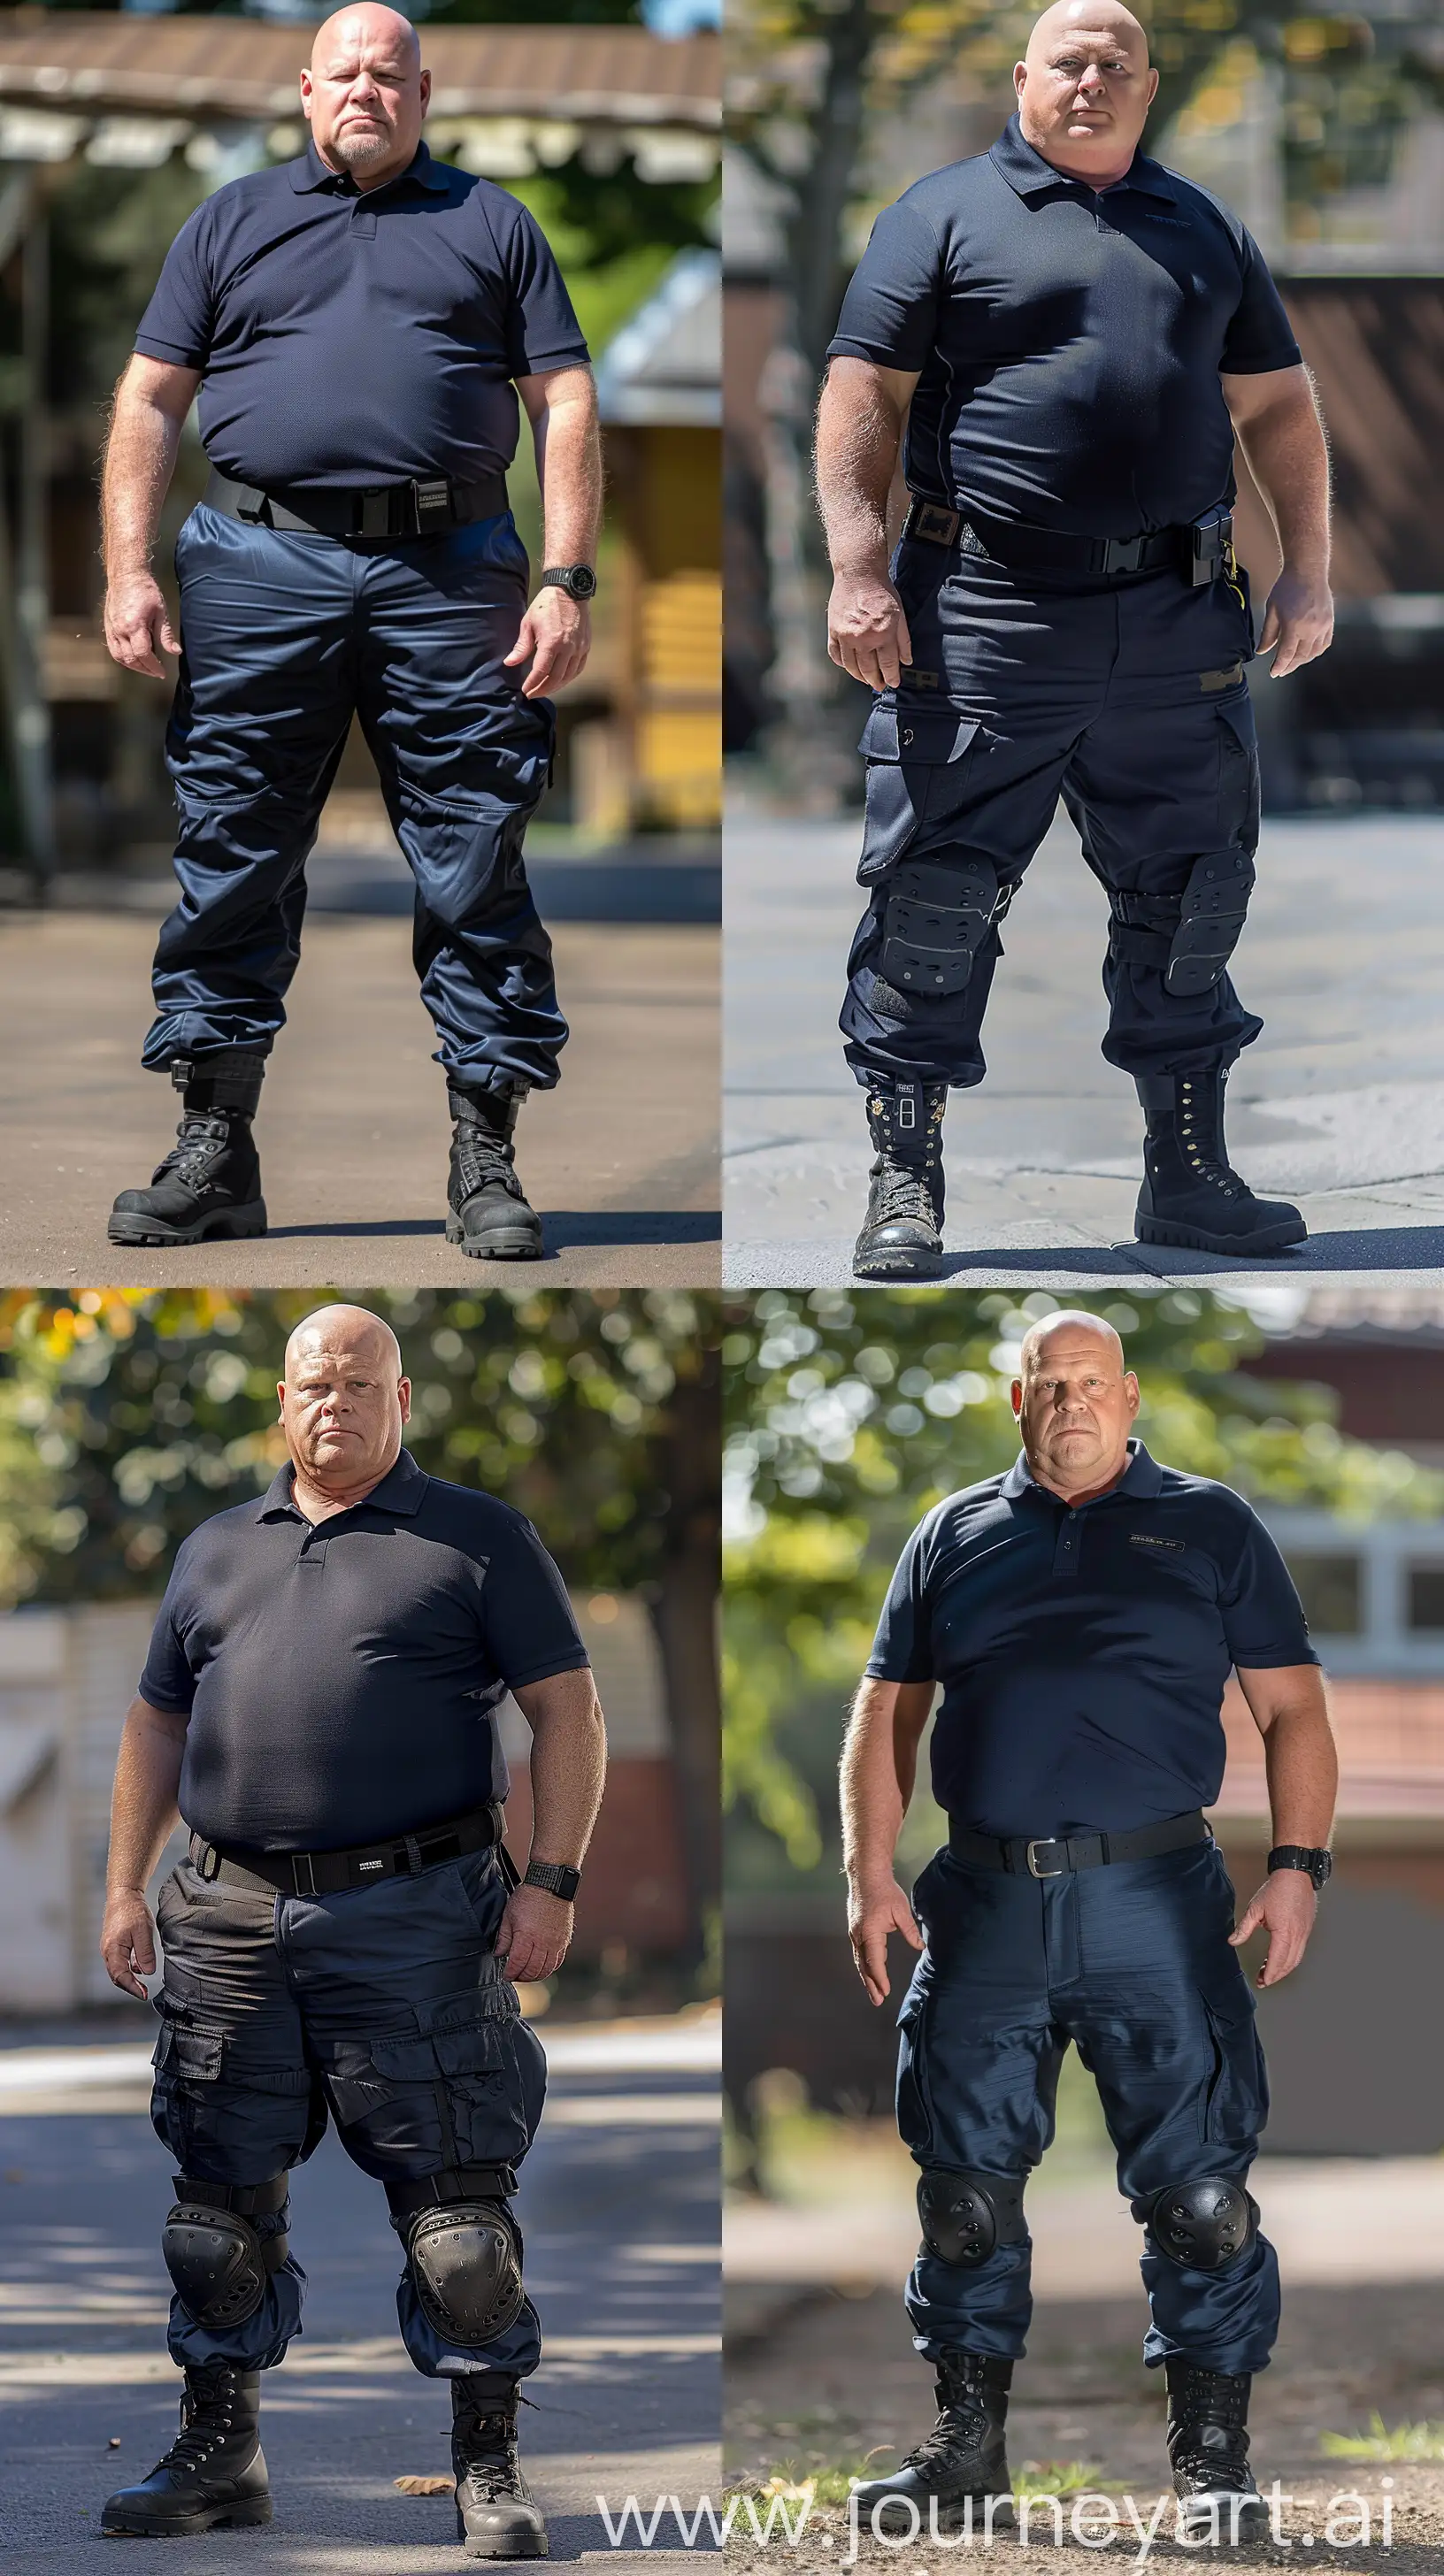 Stylish-Mature-Man-Outdoors-Navy-Silk-Attire-and-Tactical-Boots